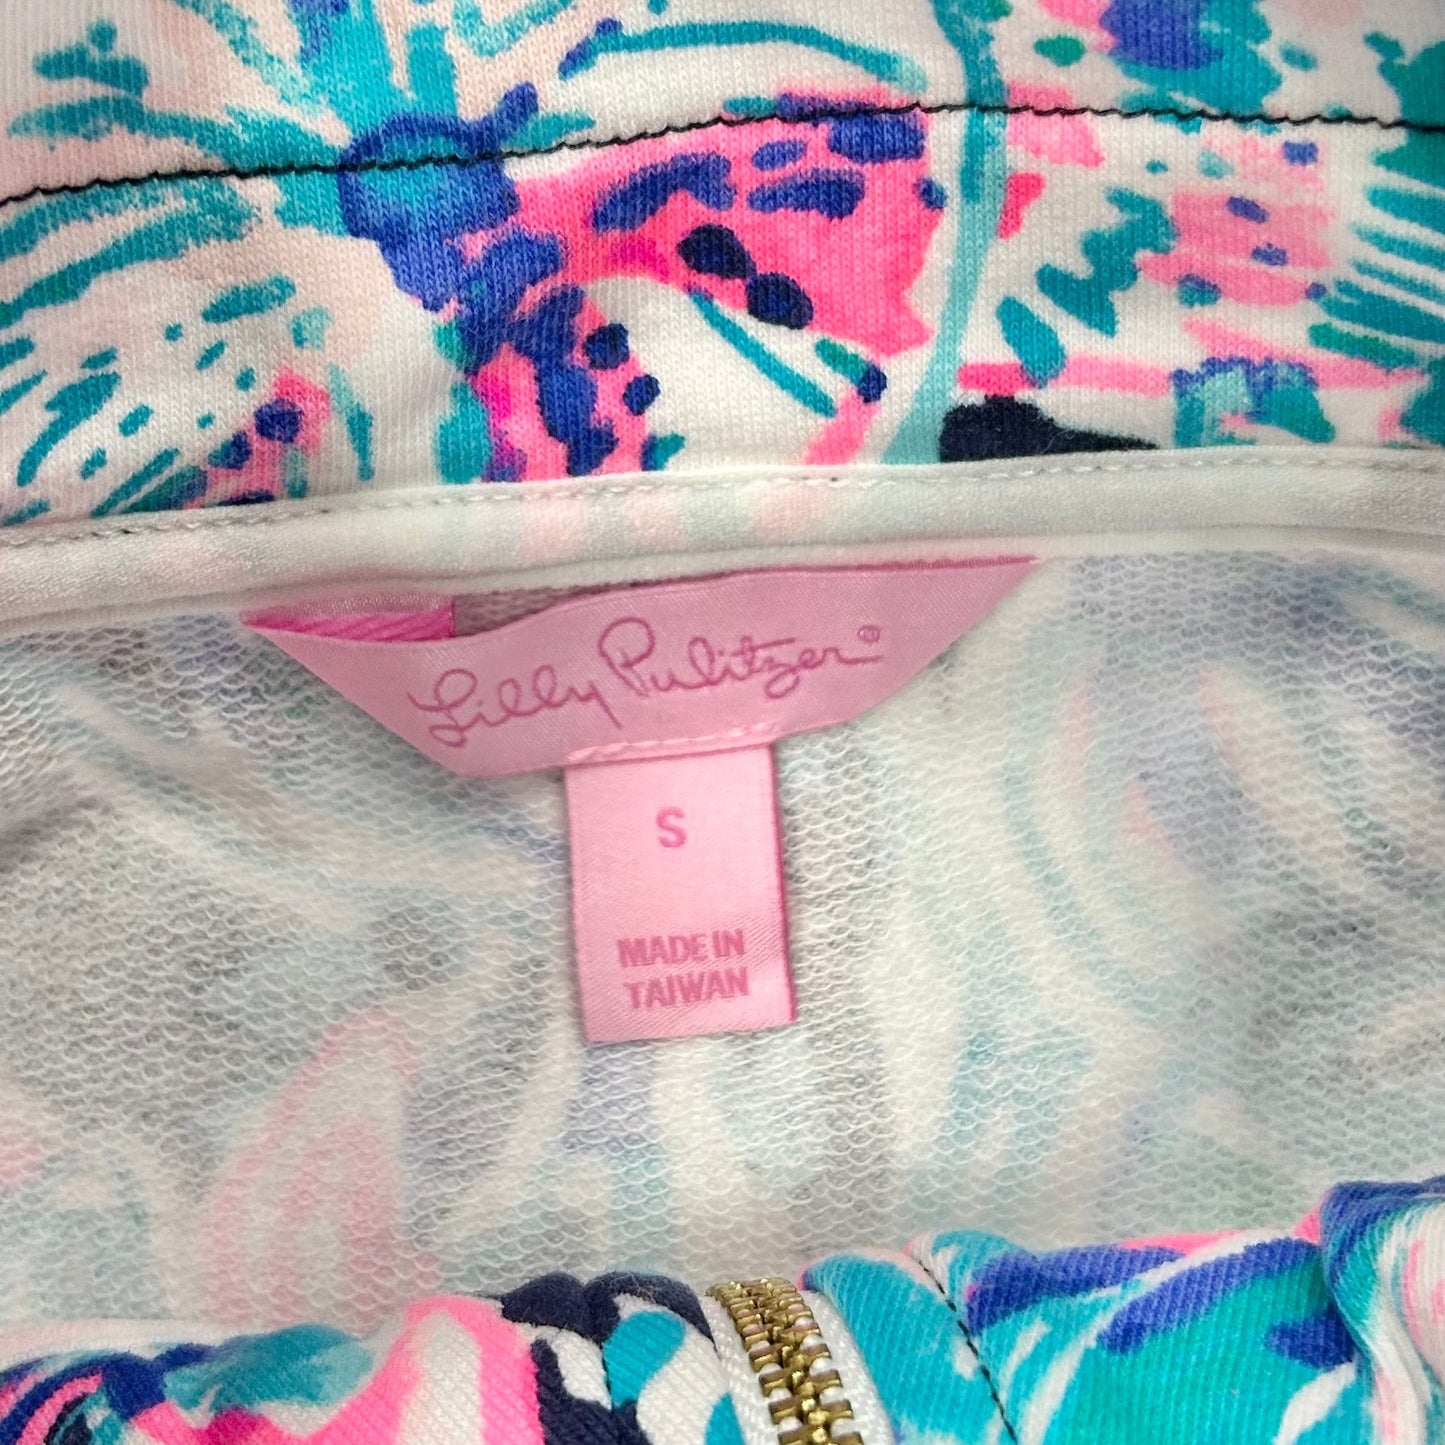 Blue & Pink Jacket Designer By Lilly Pulitzer, Size: S